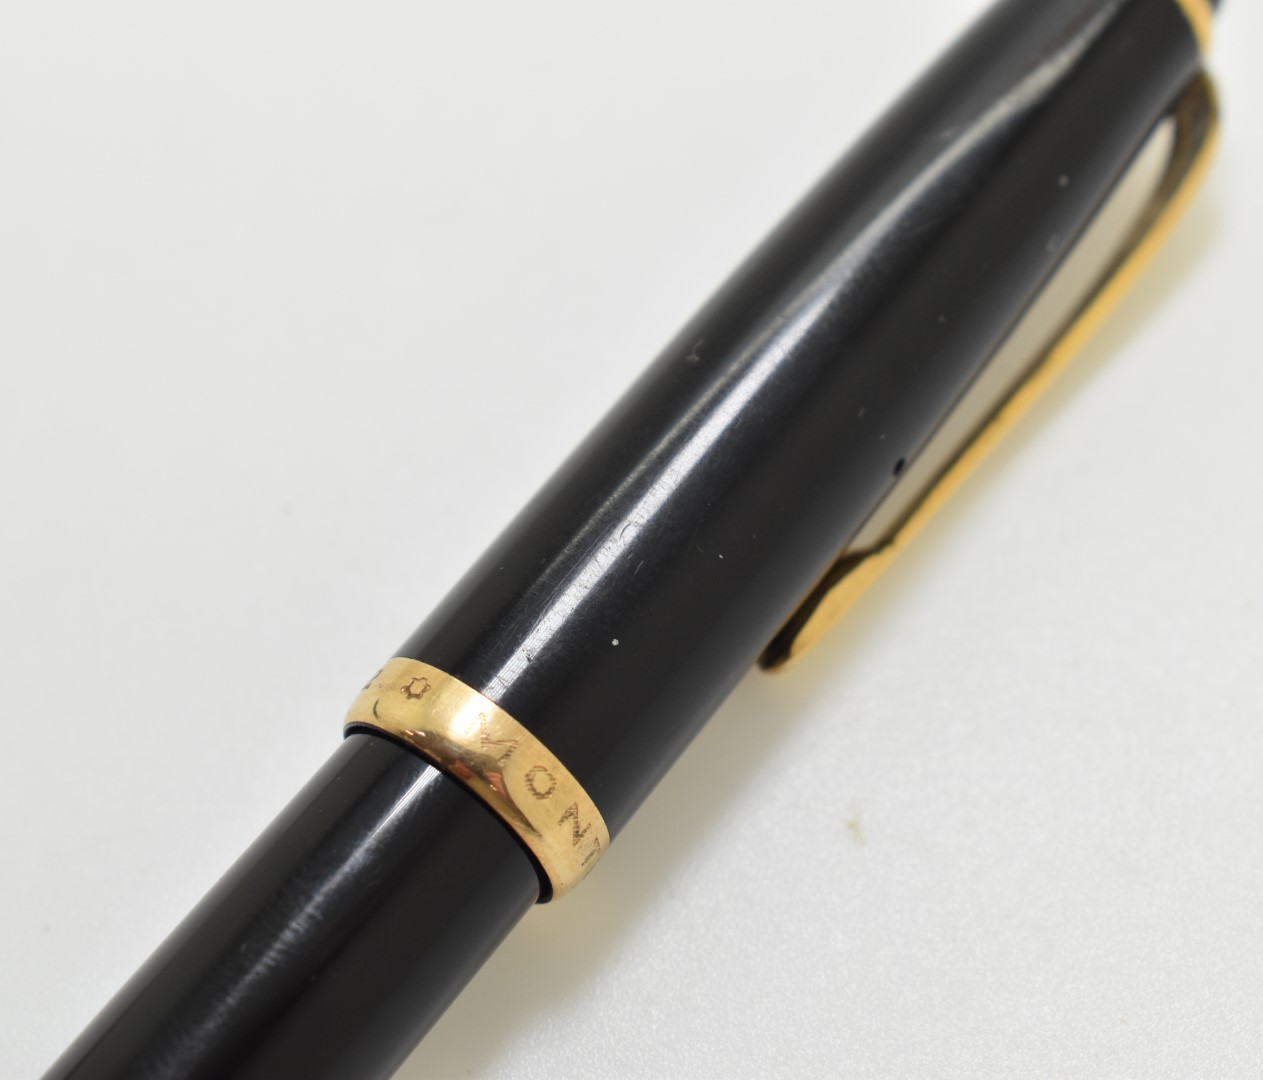 Montblanc 342 fountain pen with number 2 nib, black resin body and gold plated fittings, in original - Image 8 of 10